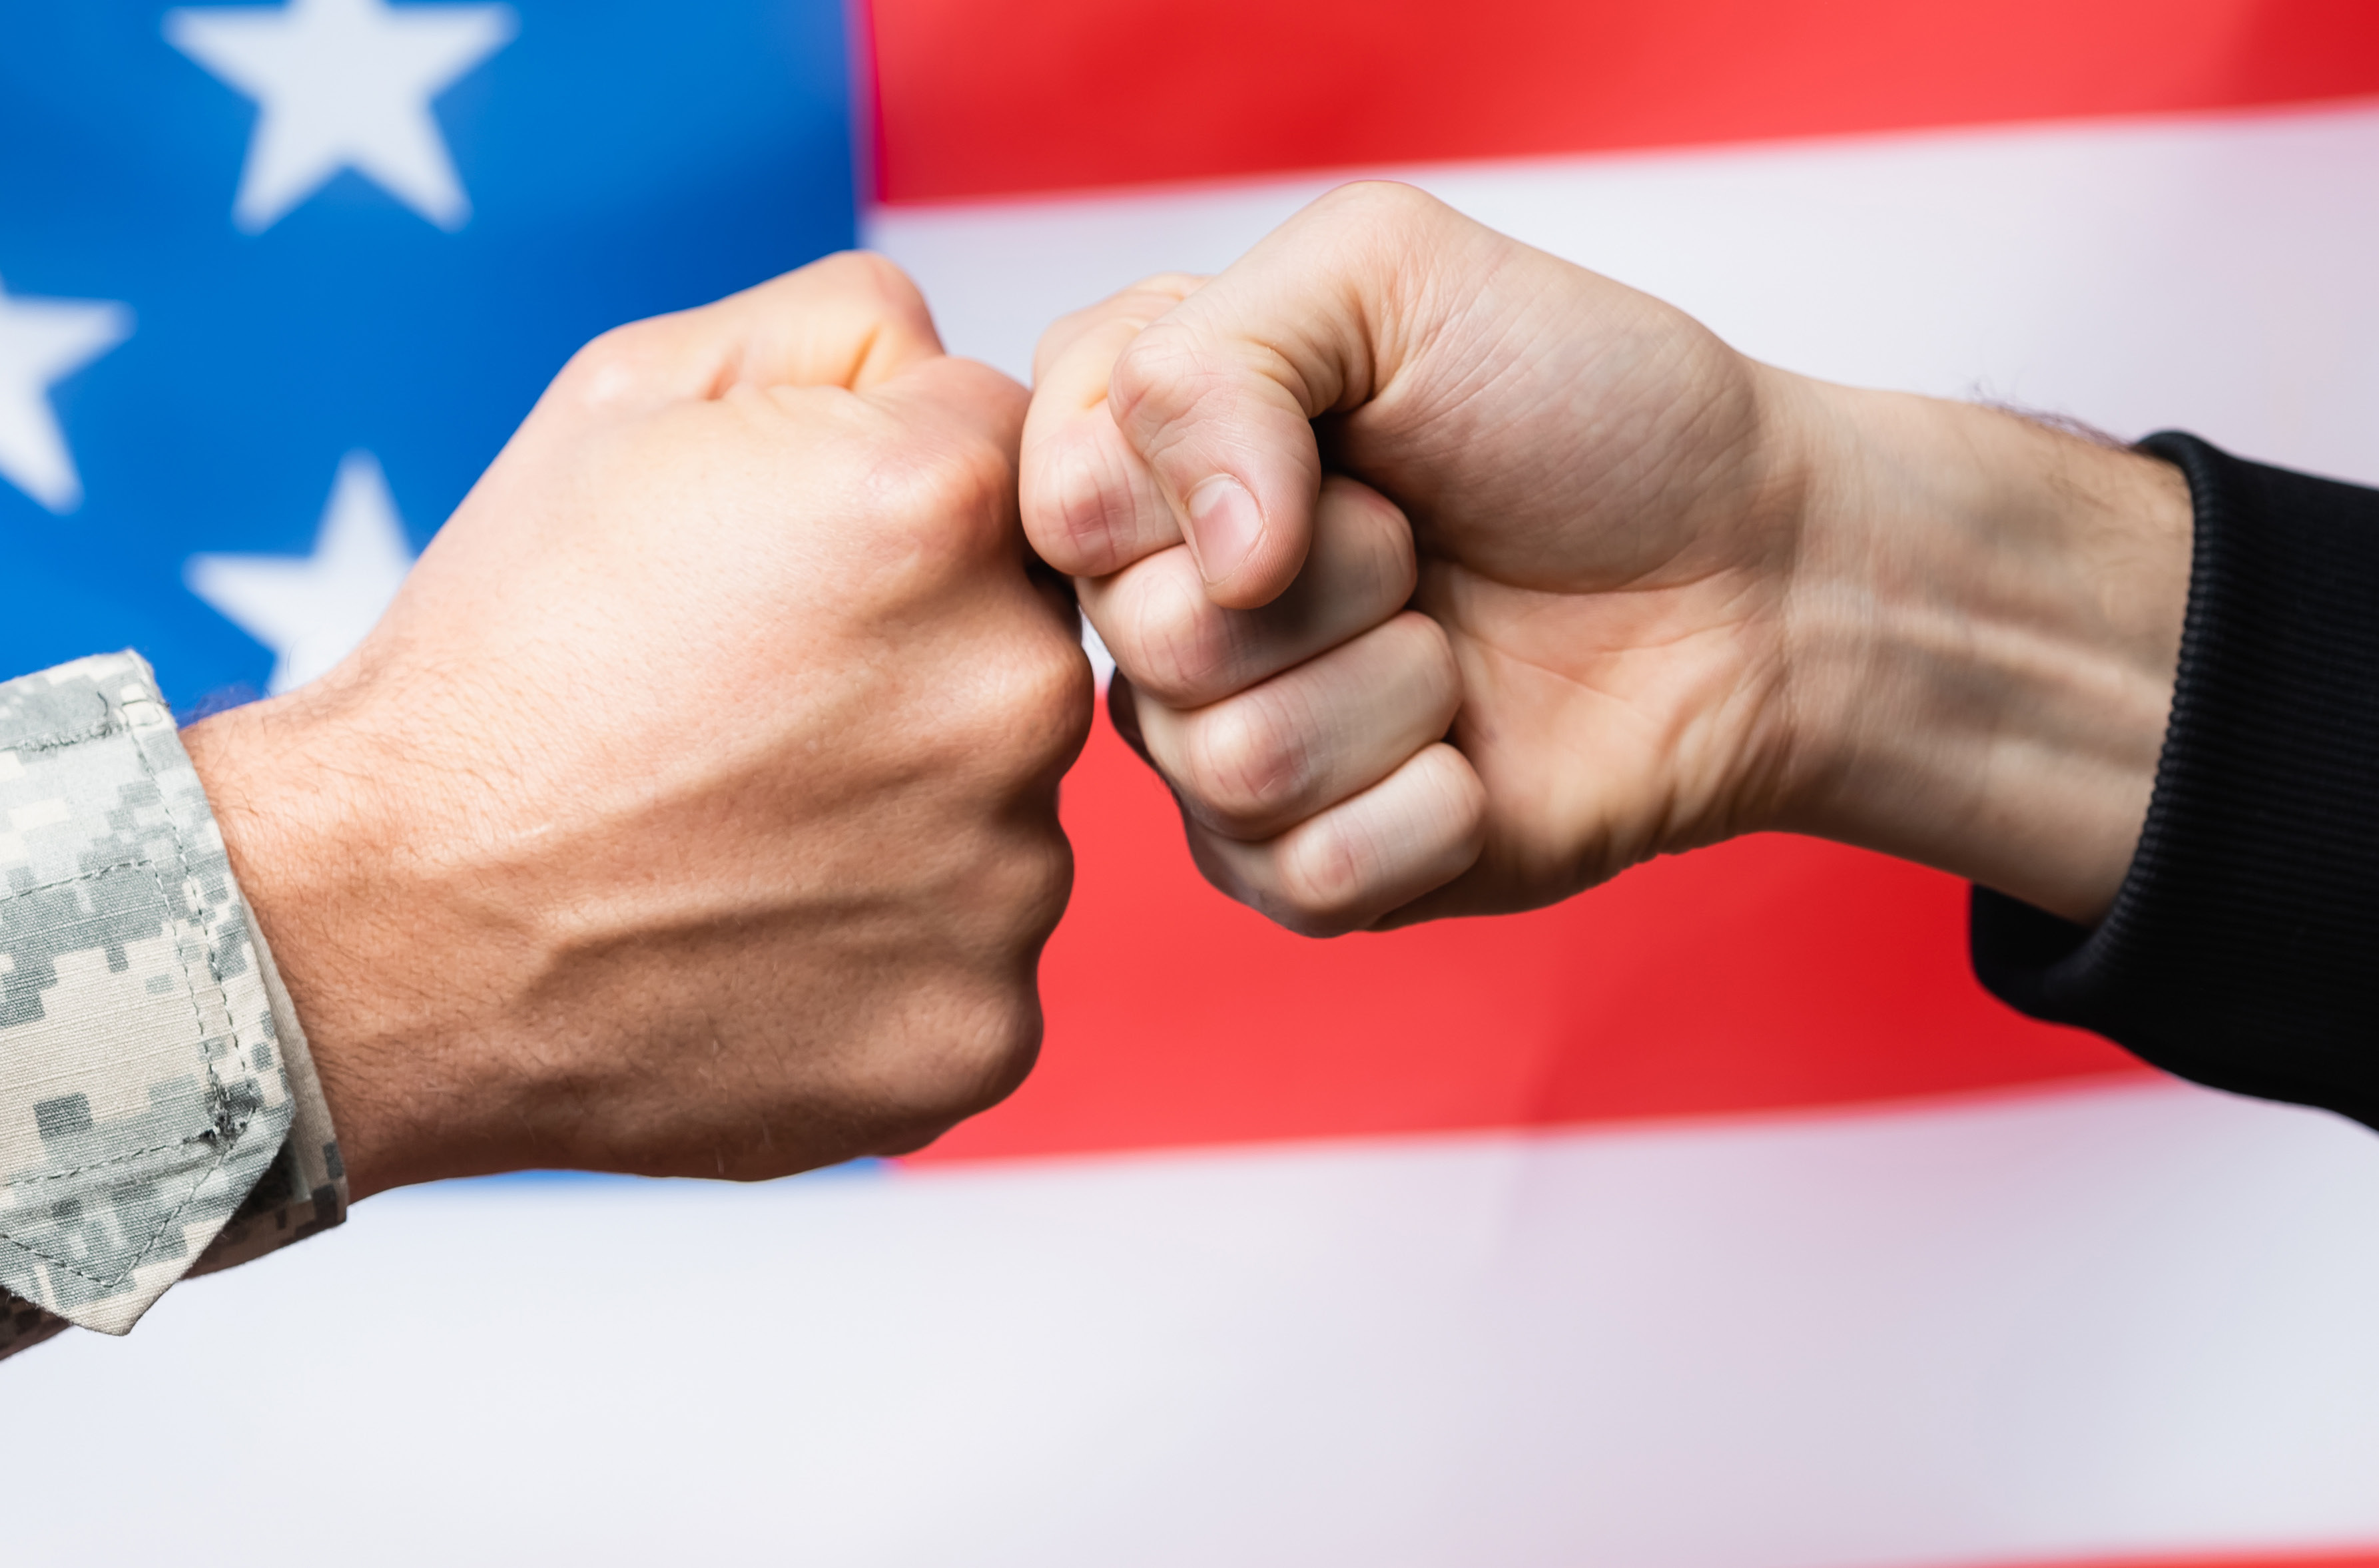 Pro American Fist-Bump between a Veteran and Imagine! with American Flag Background